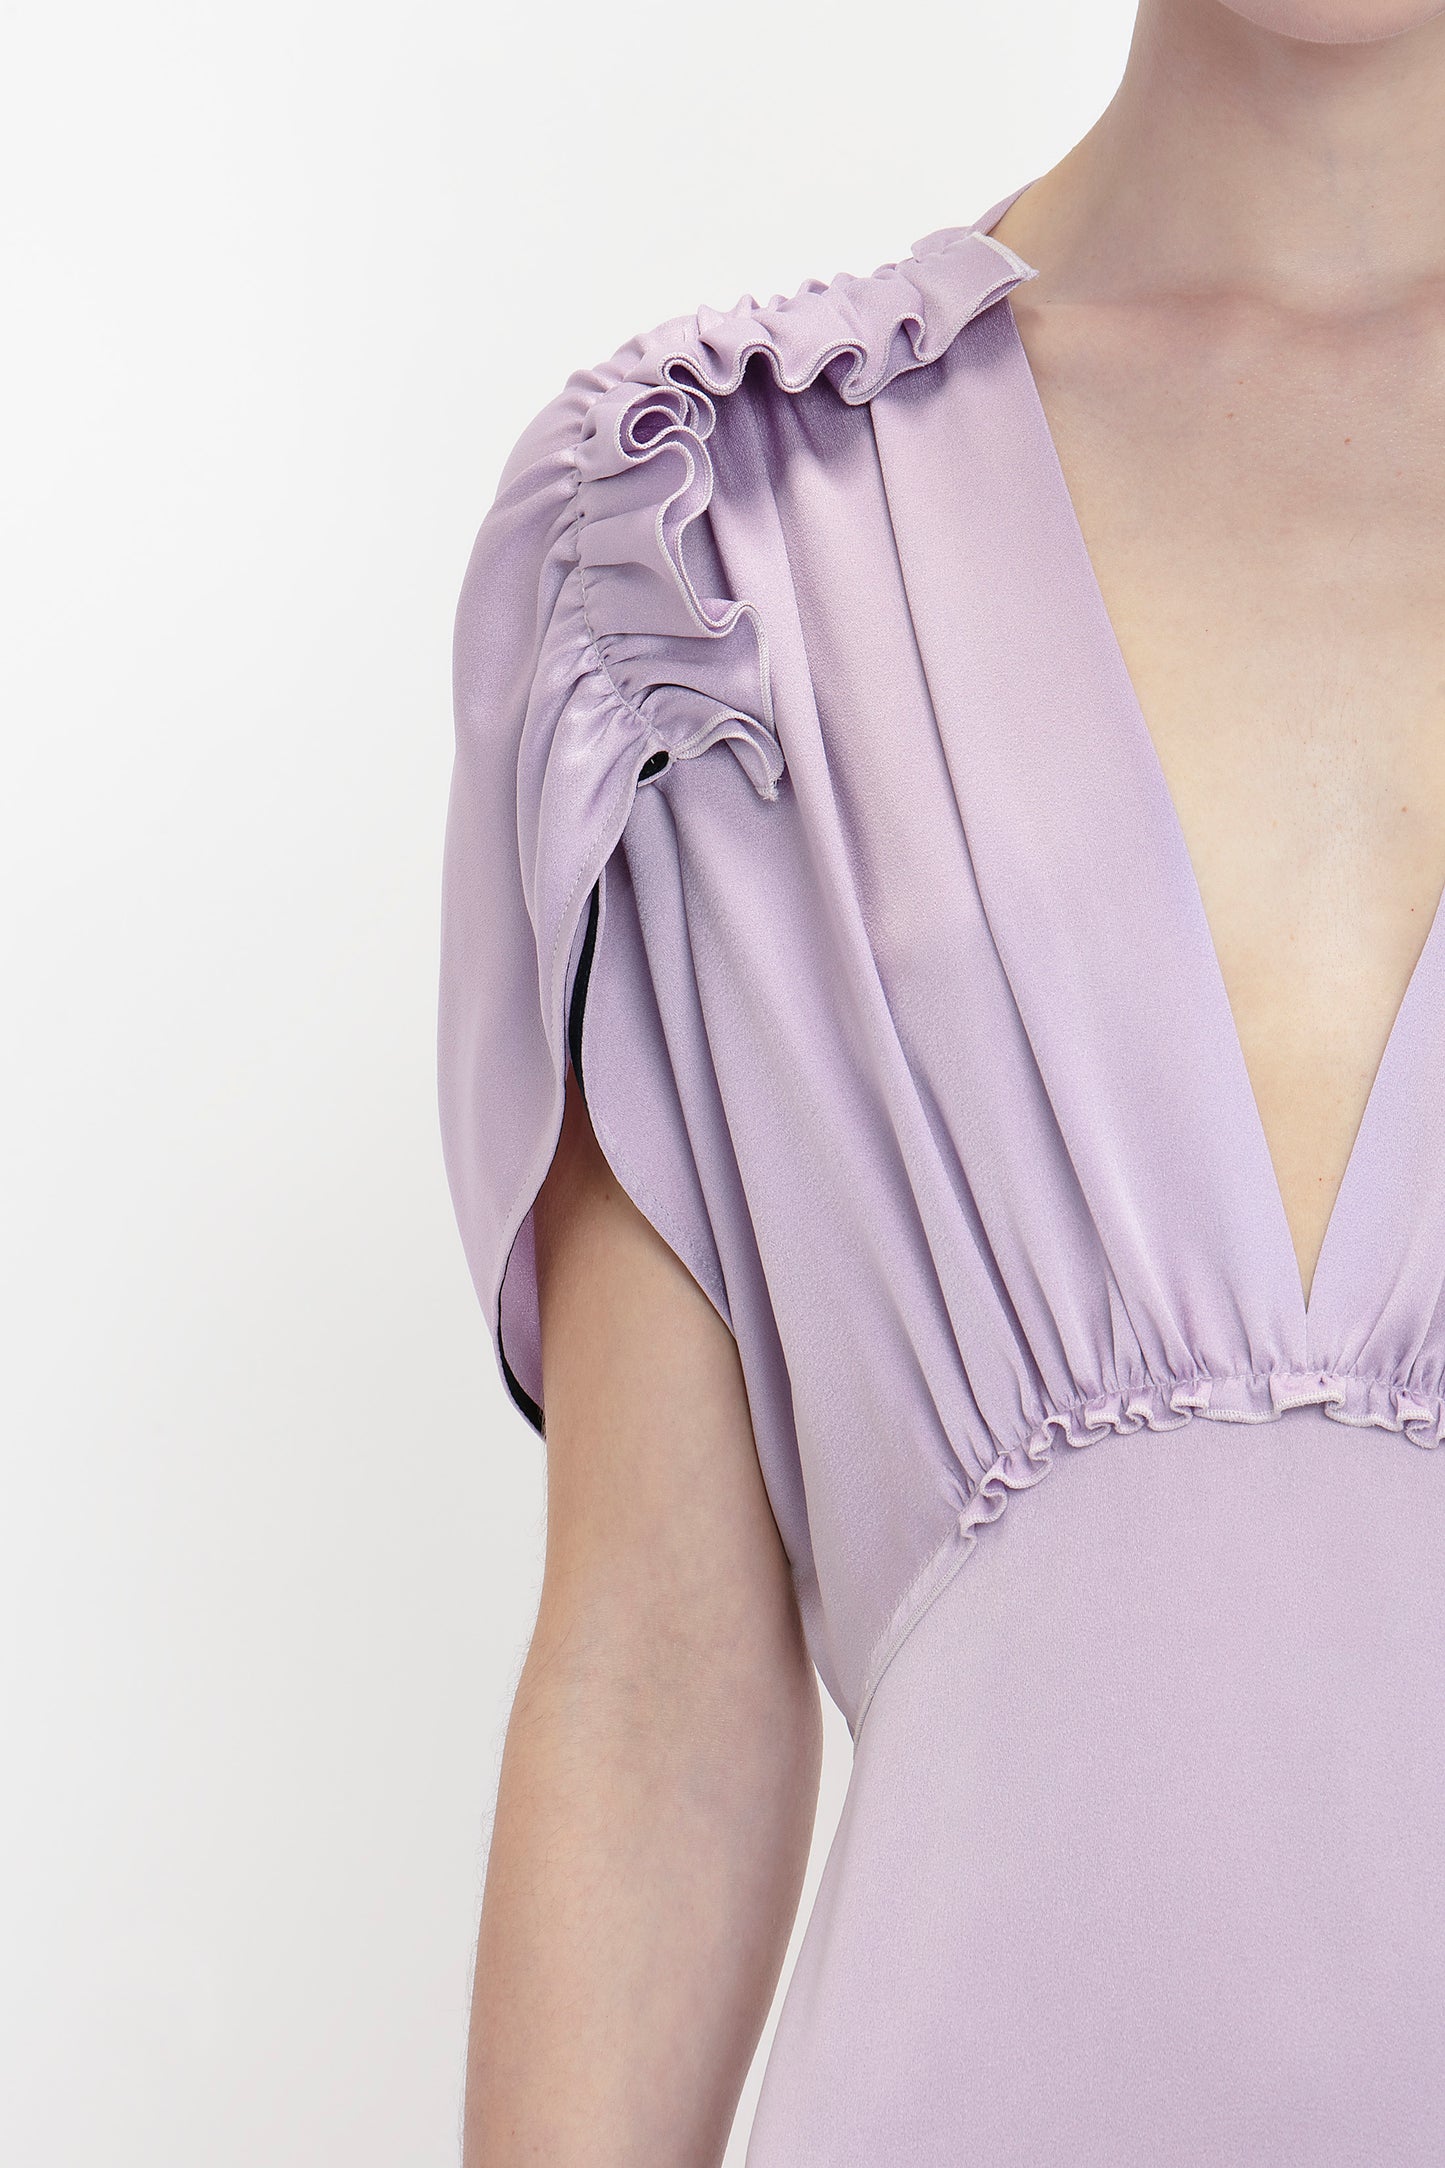 Close-up of a person wearing an elegant Victoria Beckham V-Neck Ruffle Midi Dress In Petunia with ruffled shoulder details reminiscent of Victoria Beckham's sophisticated style. The background is plain white.